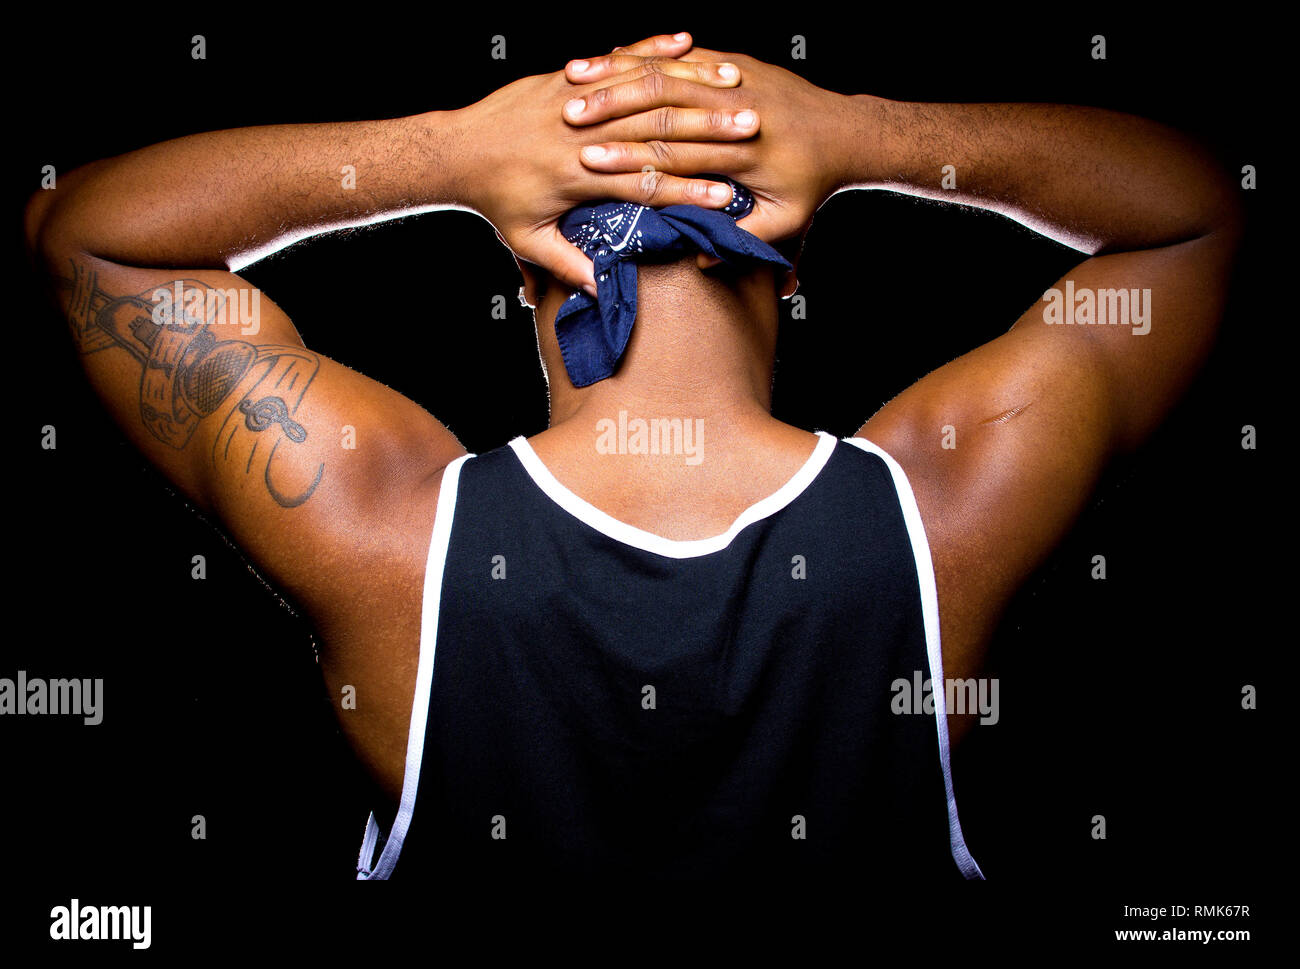 Black man with hands up behind his back is under arrest Stock Photo